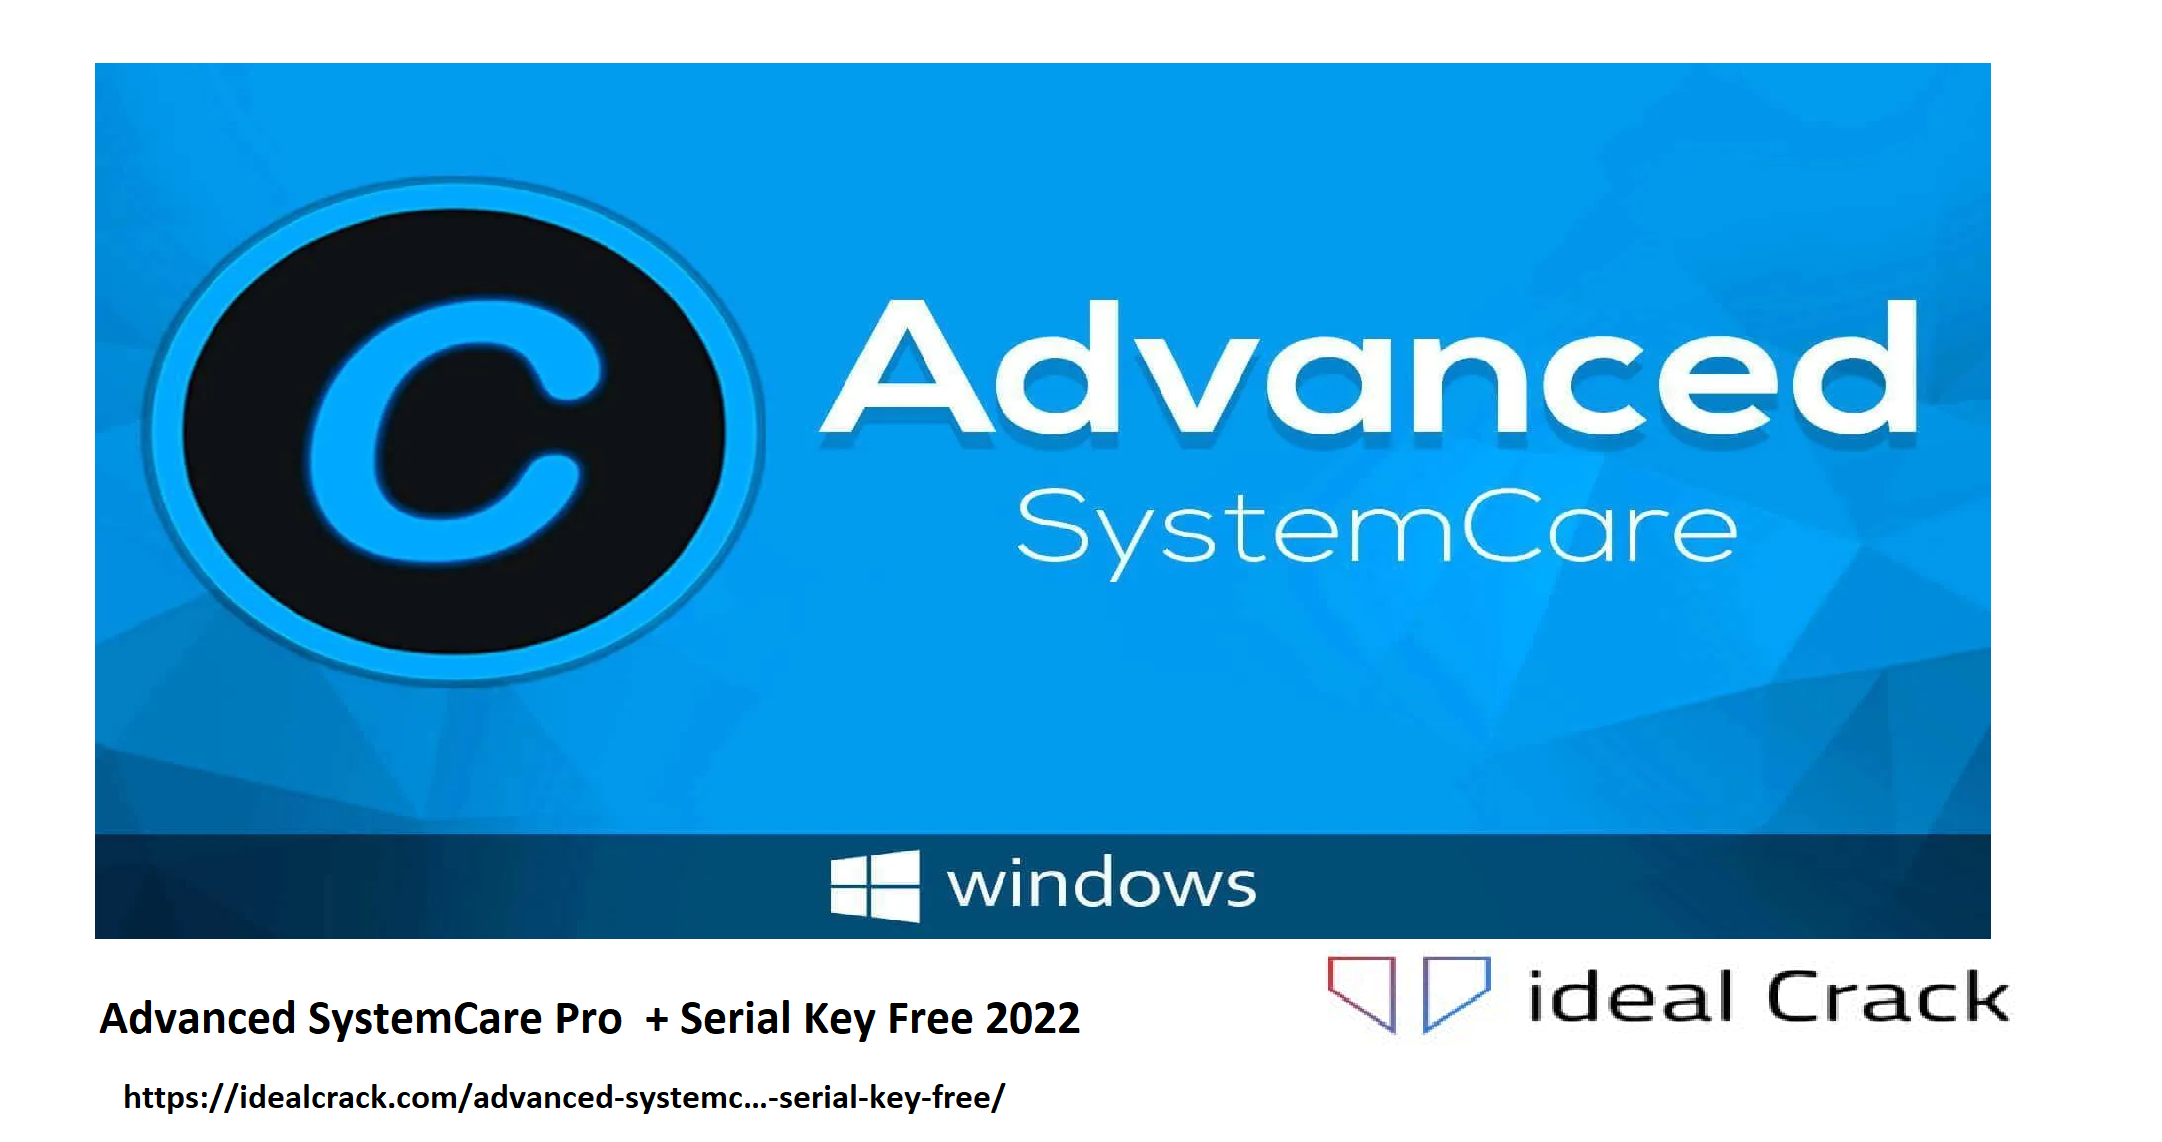 Advanced SystemCare Pro  + Serial Key Free 2022